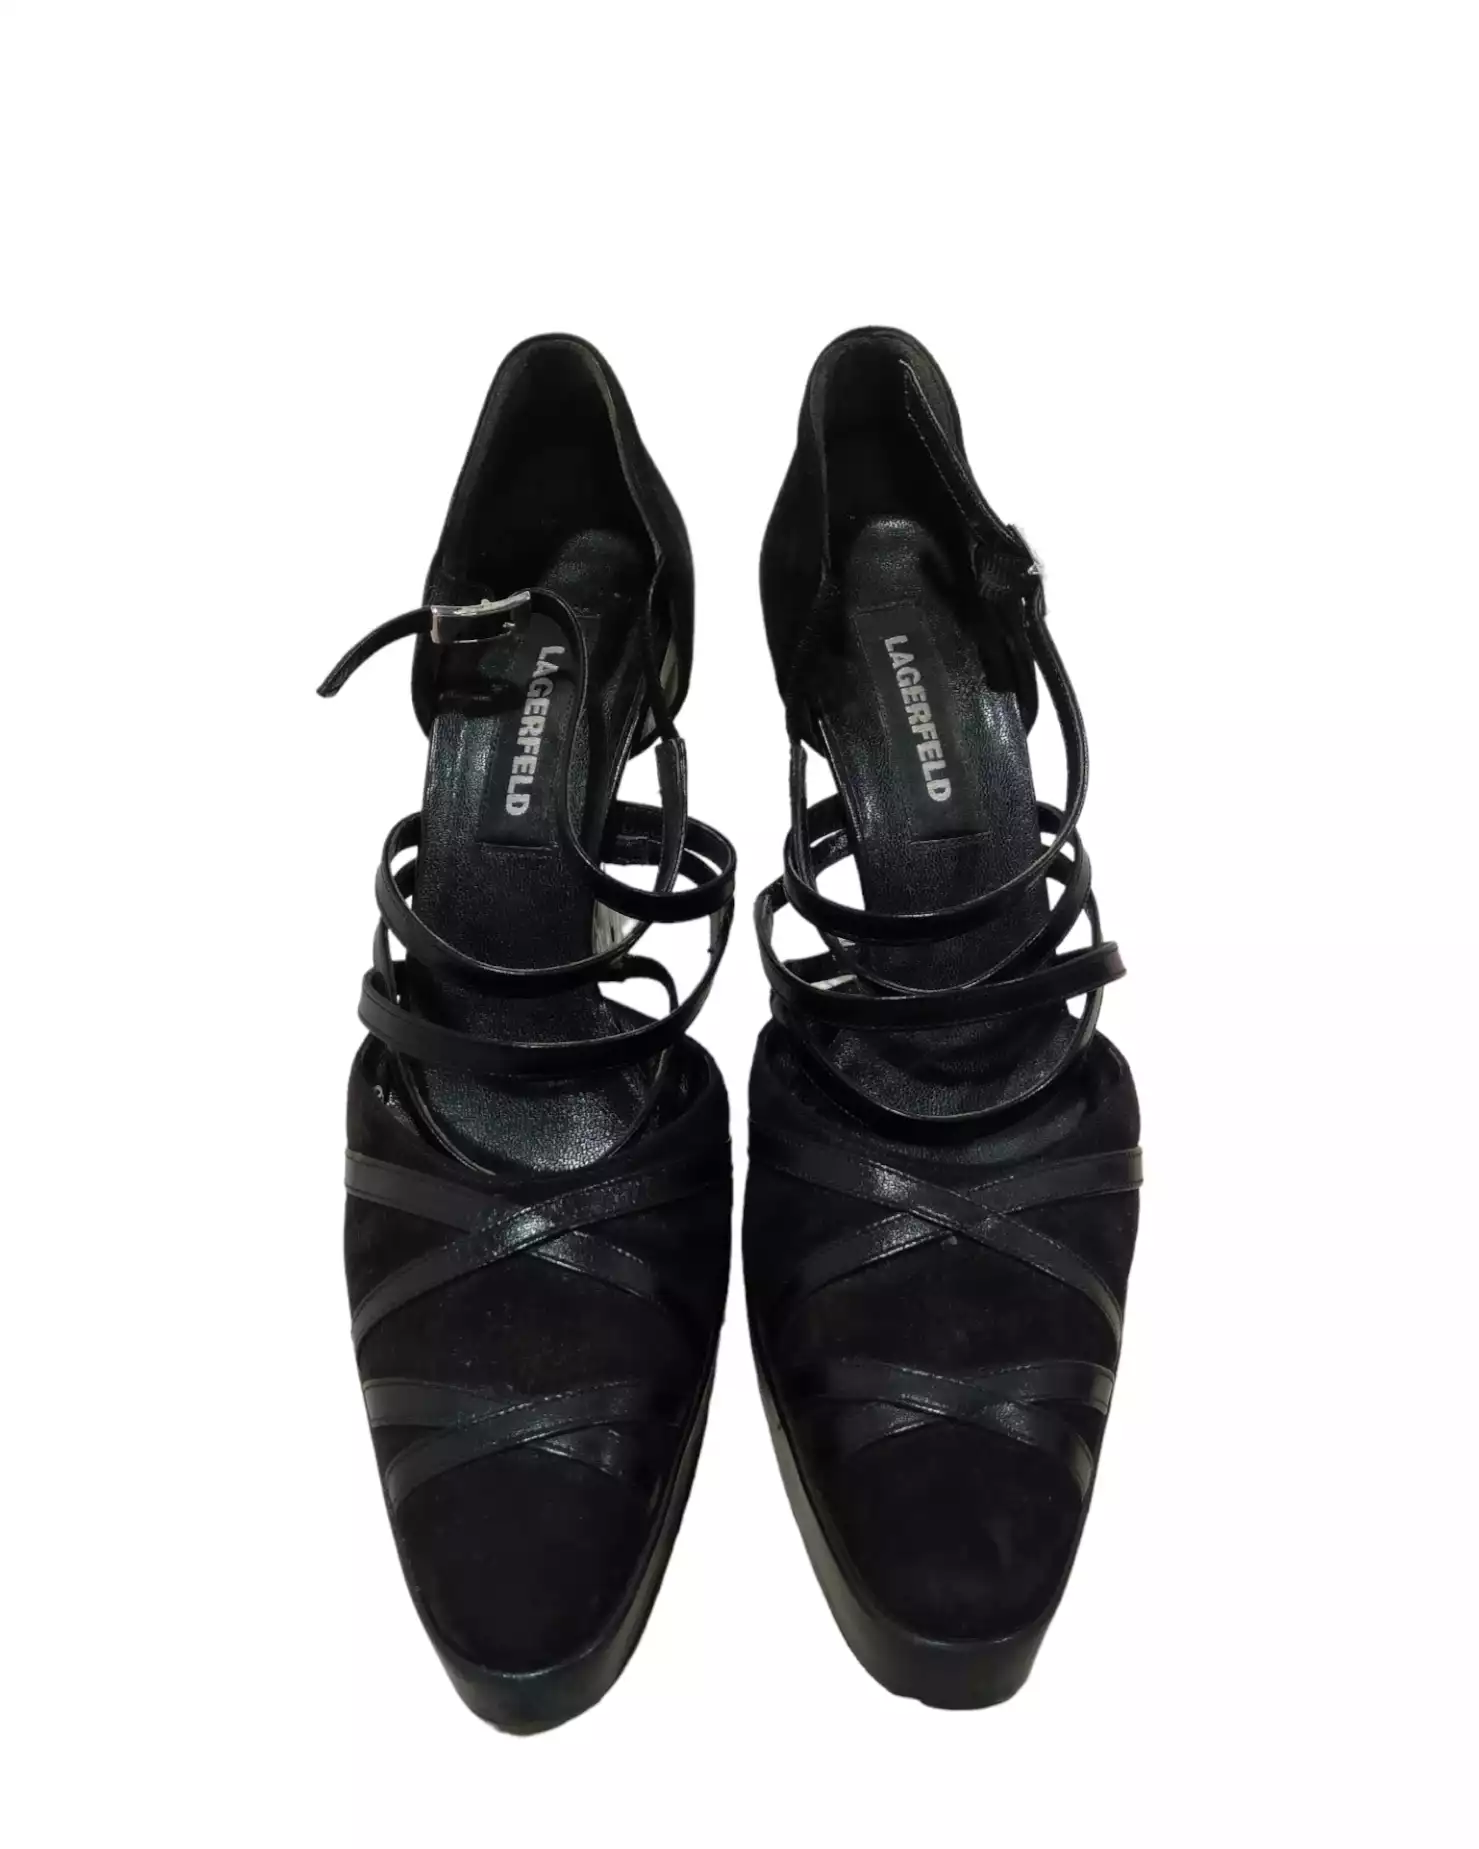 Shoes by Karl Lagerfield